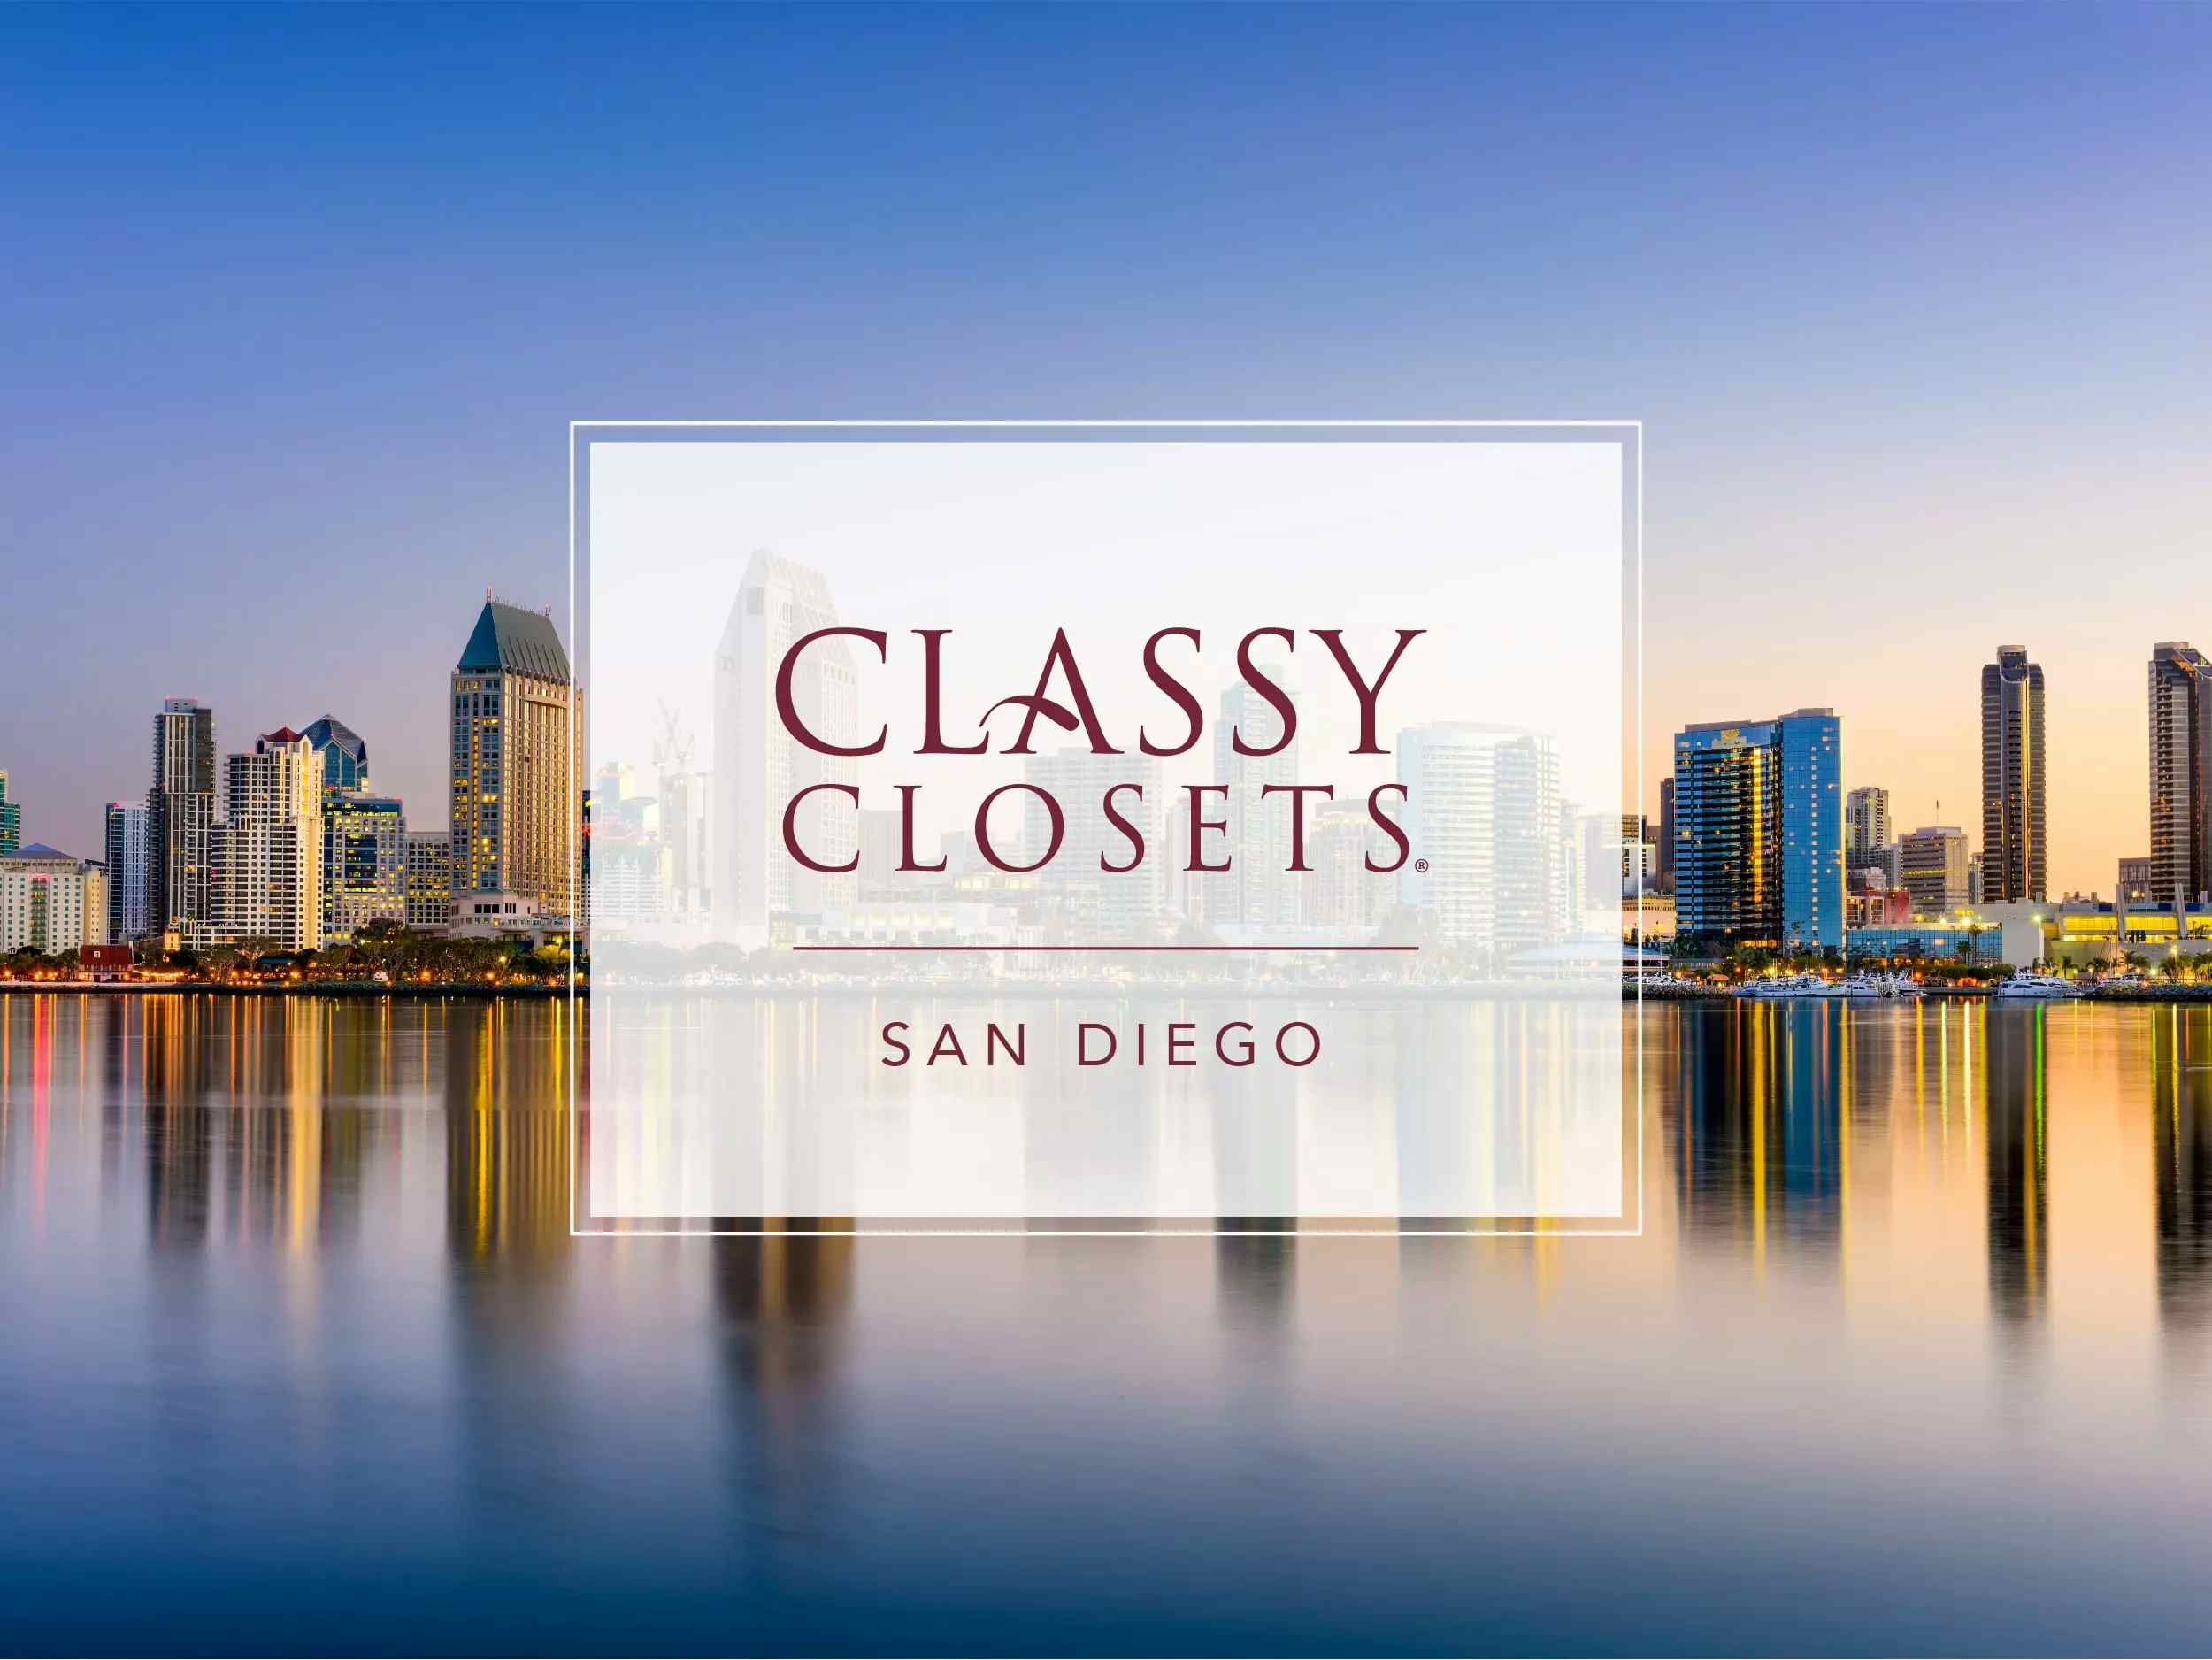 showroom on the location page-/images/locations/san-diego.webp